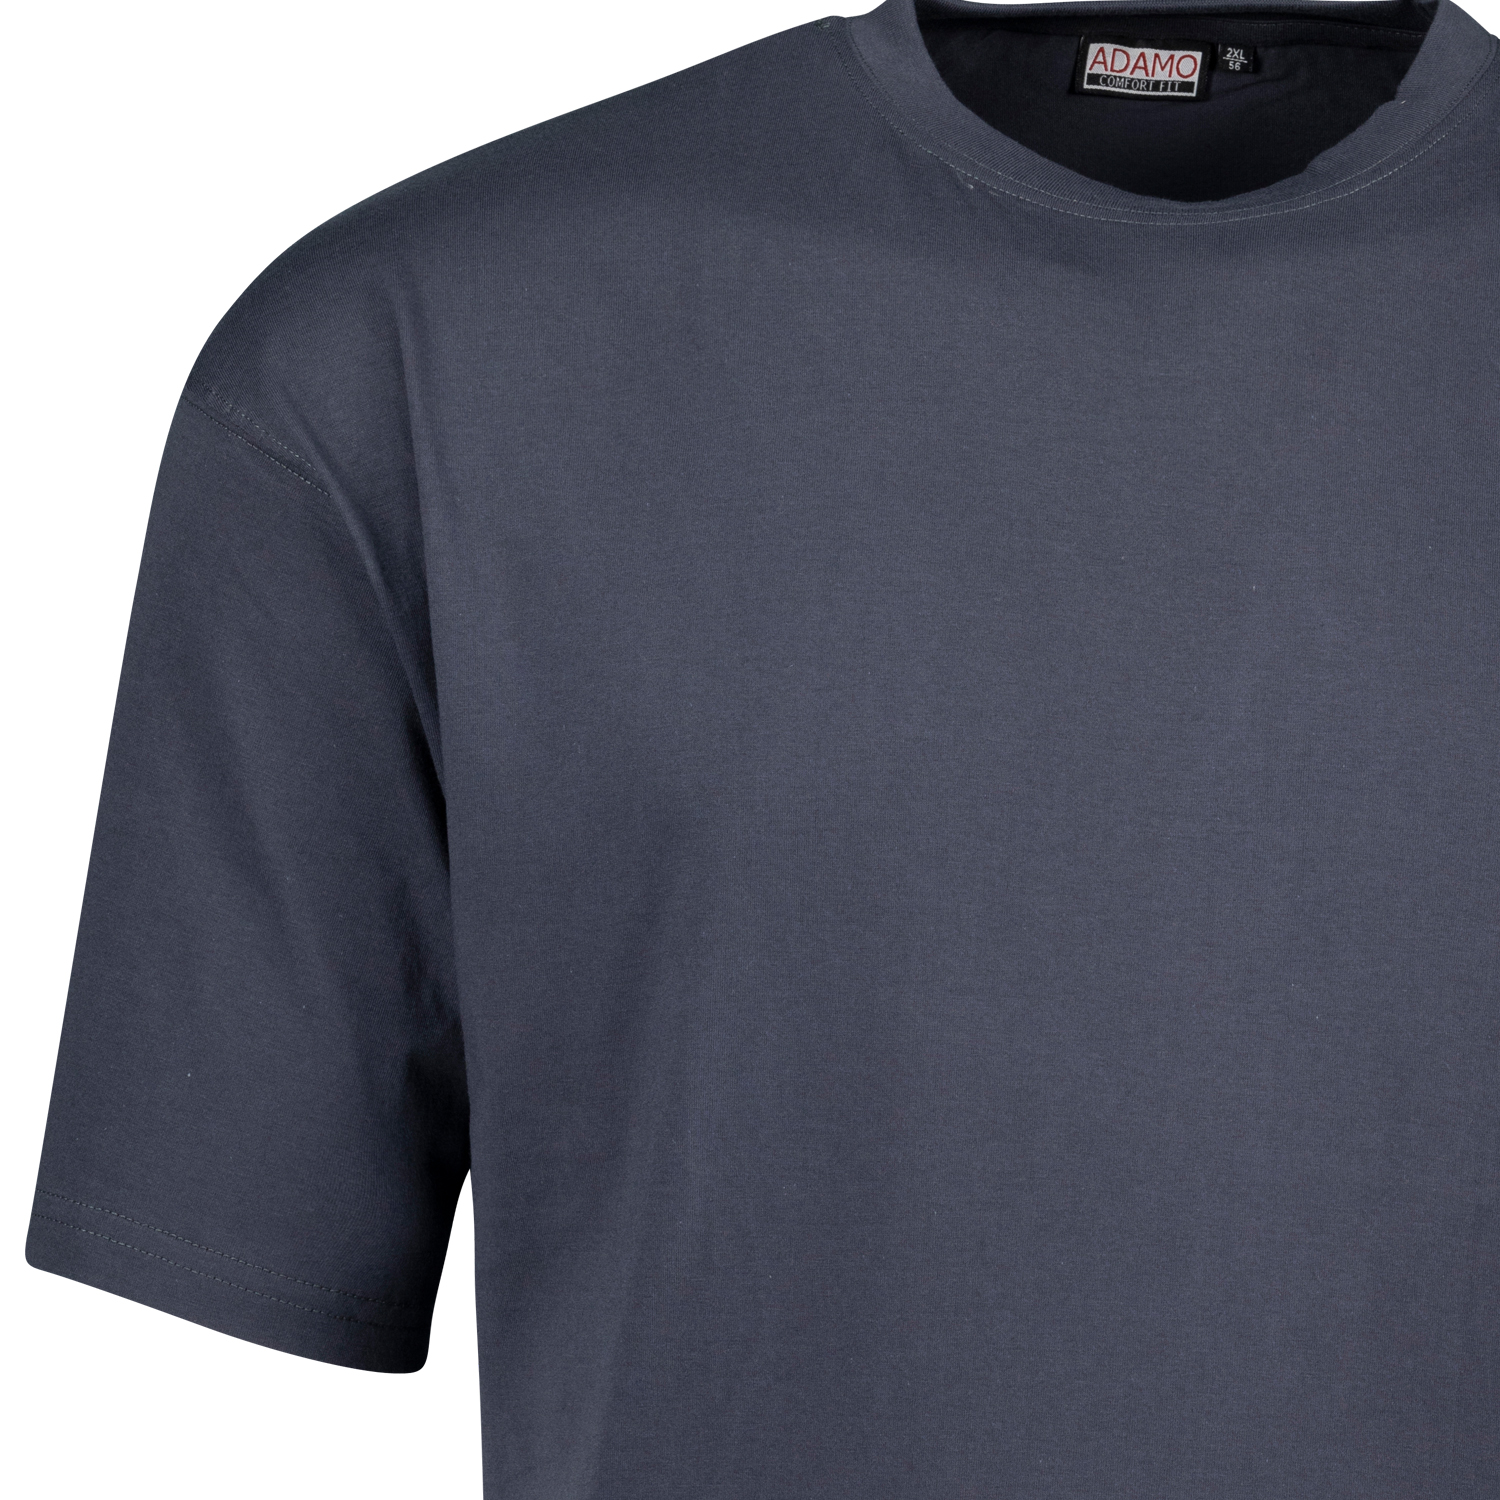 Double pack COMFORT FIT dark grey MARLON t-shirt by ADAMO up to kingsize 12XL